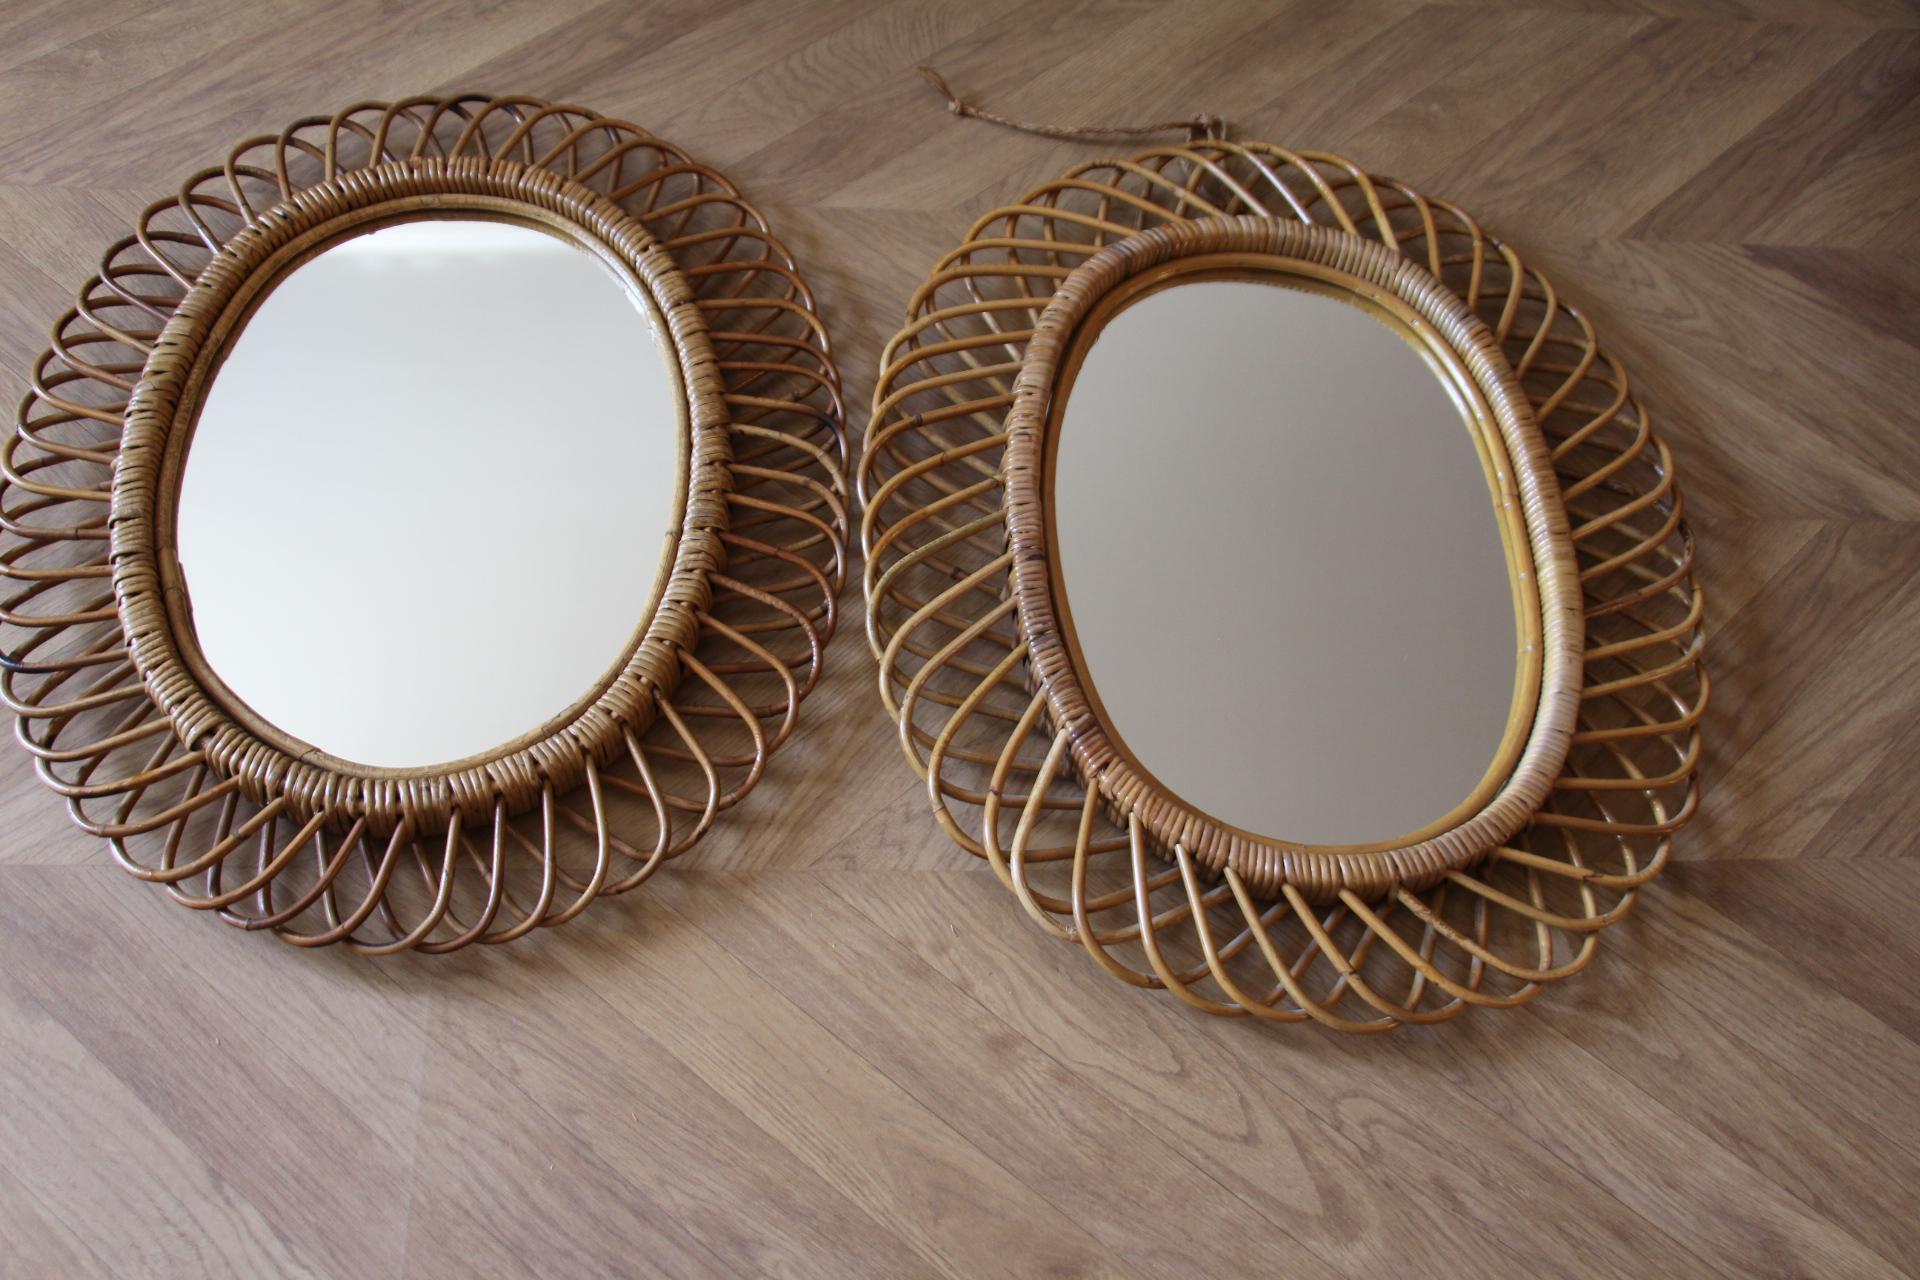 Pair of Vintage 1960s Rattan and Bamboo Round Wall Mirror by Franco Albini For Sale 7